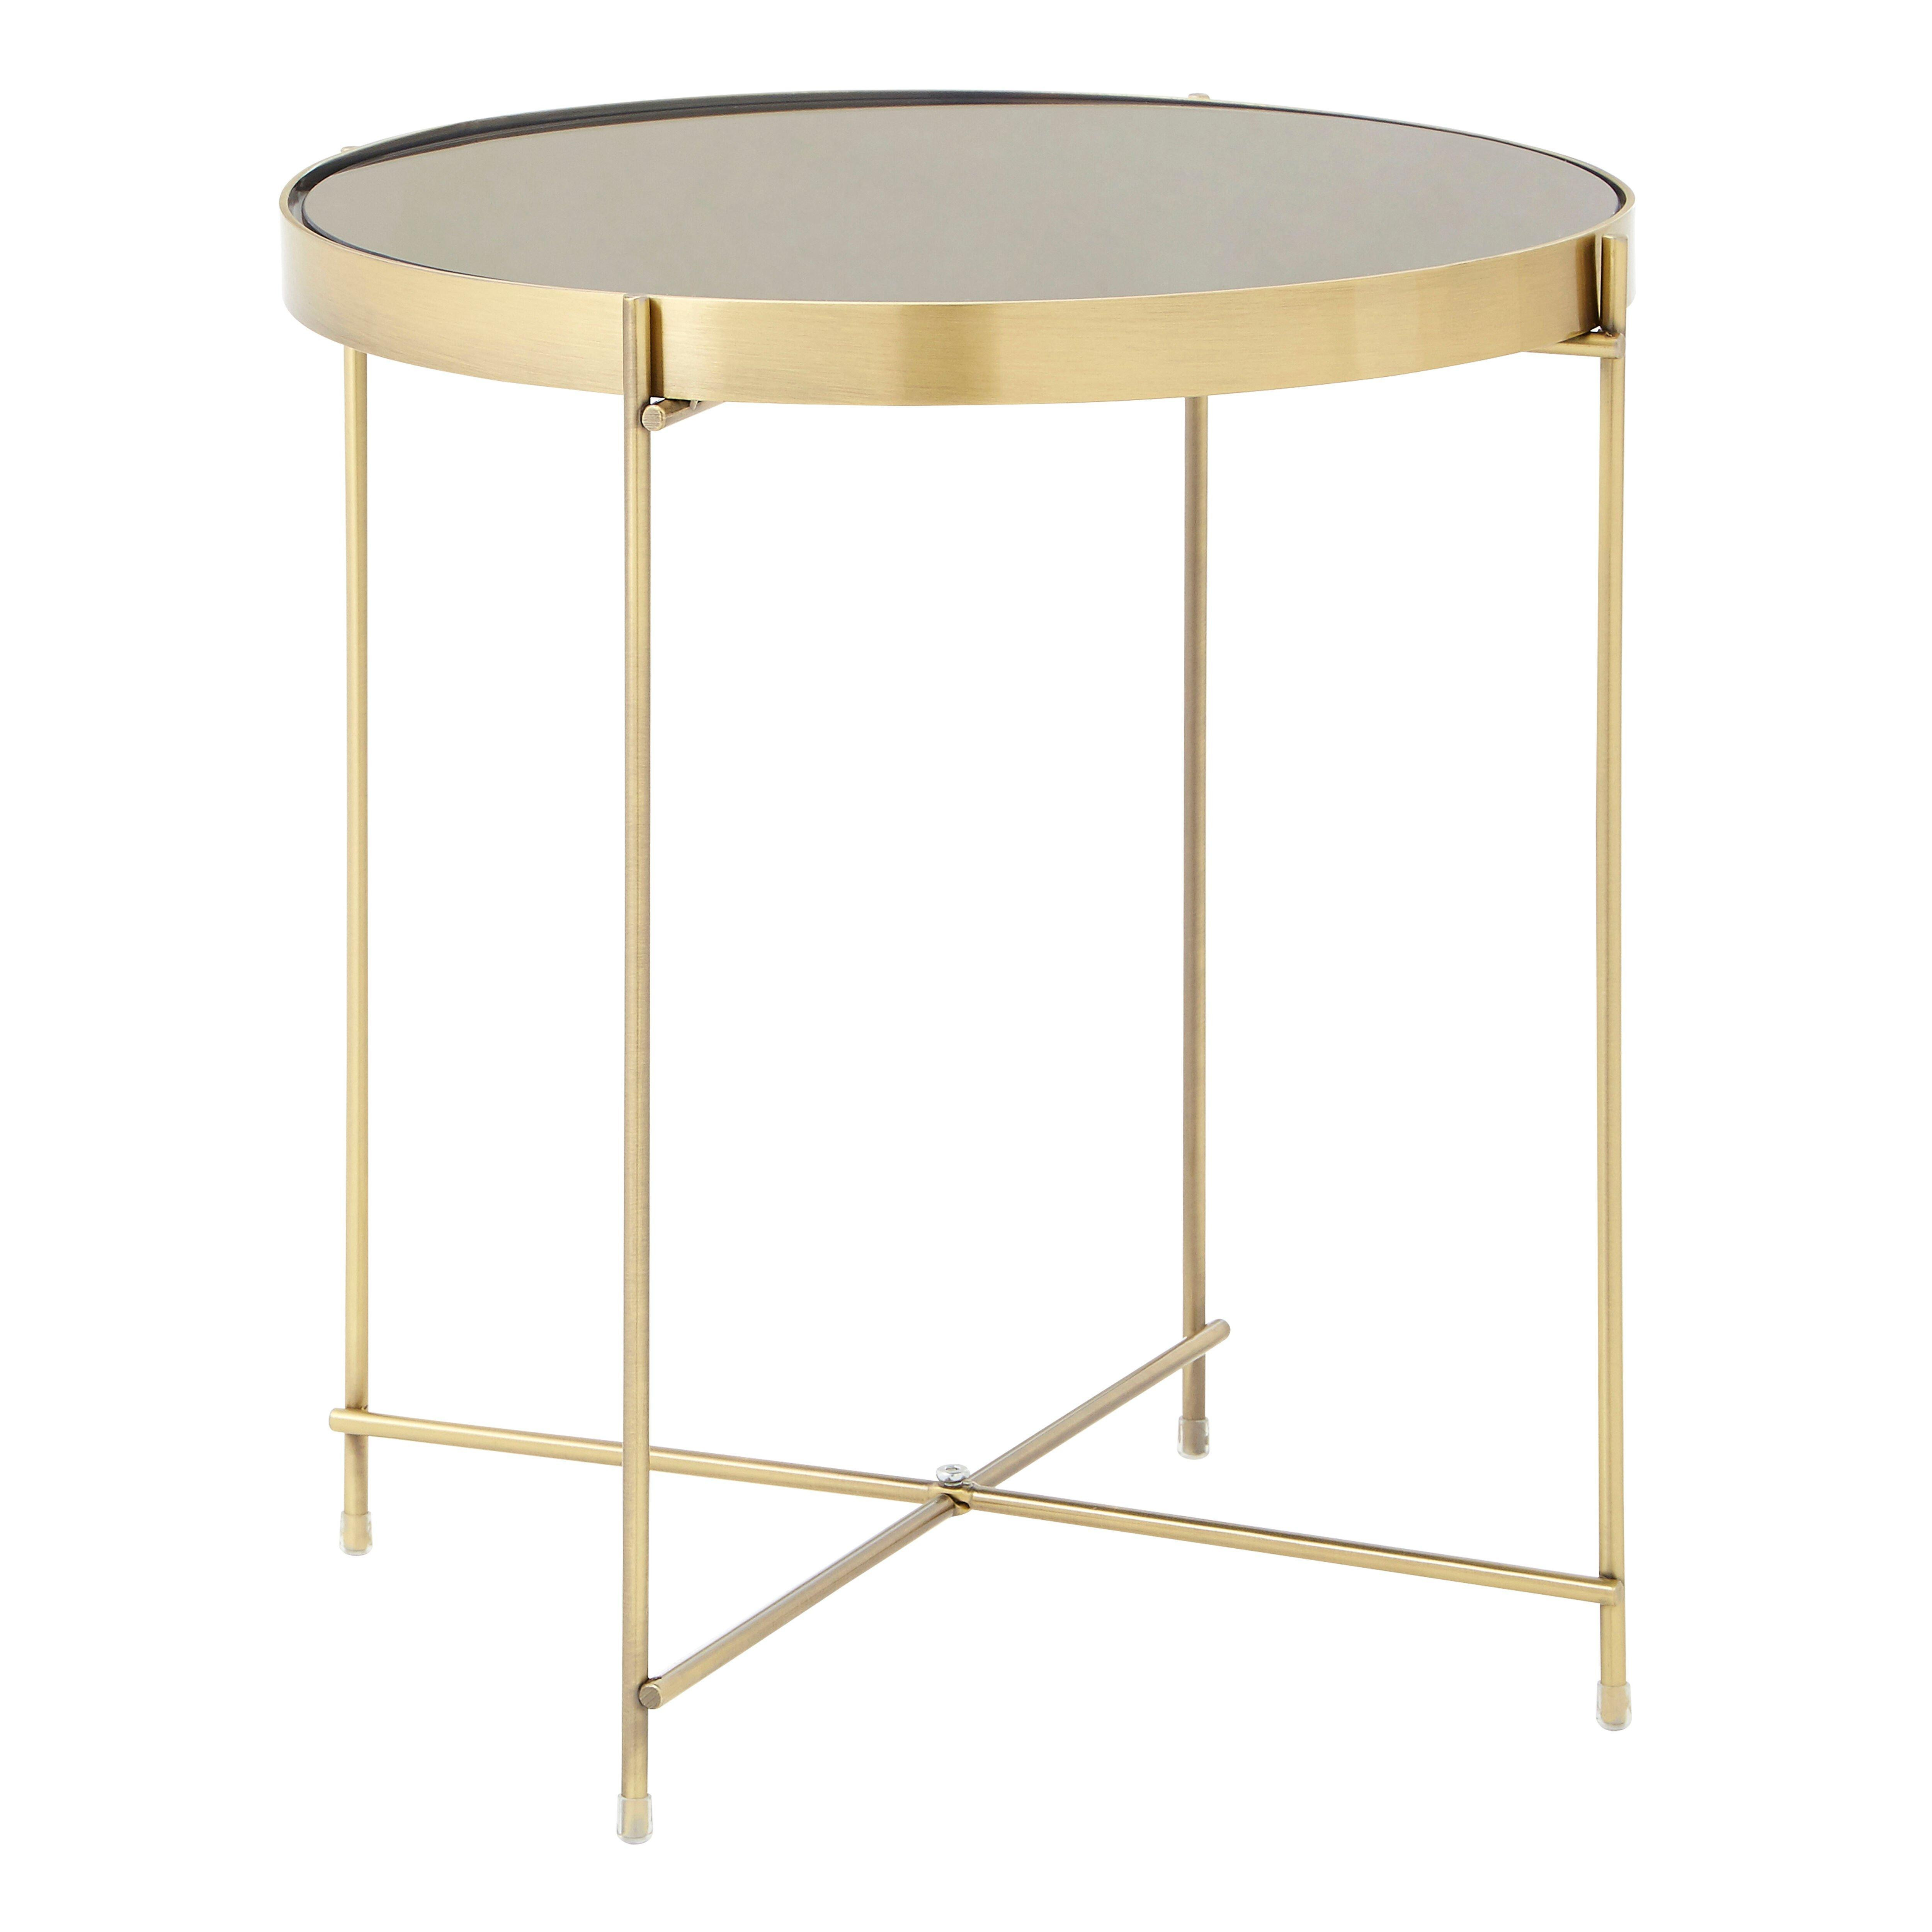 Allure Mirror Low Side Table - image 1